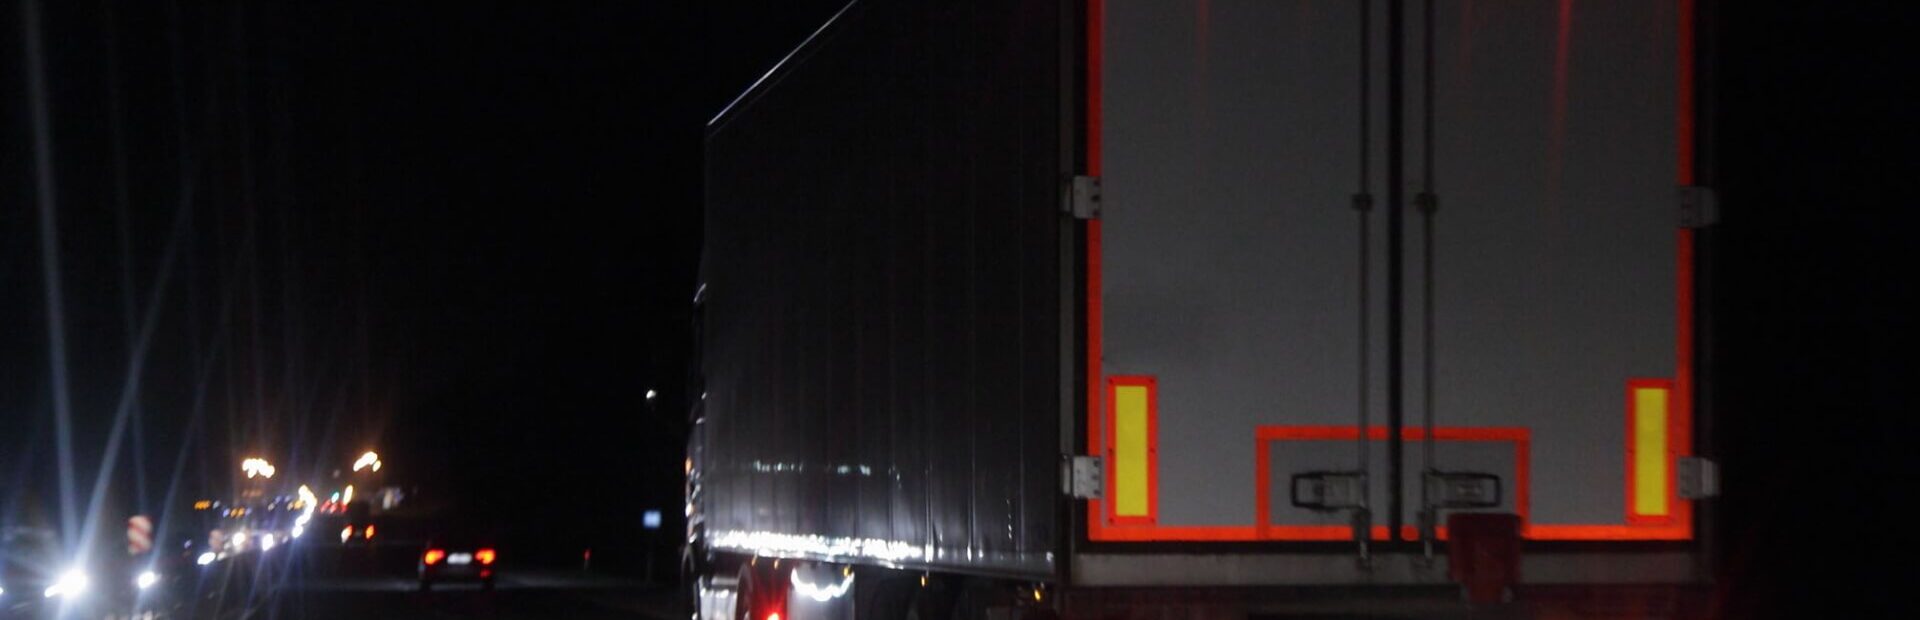 Commercial vehicle on the road at night